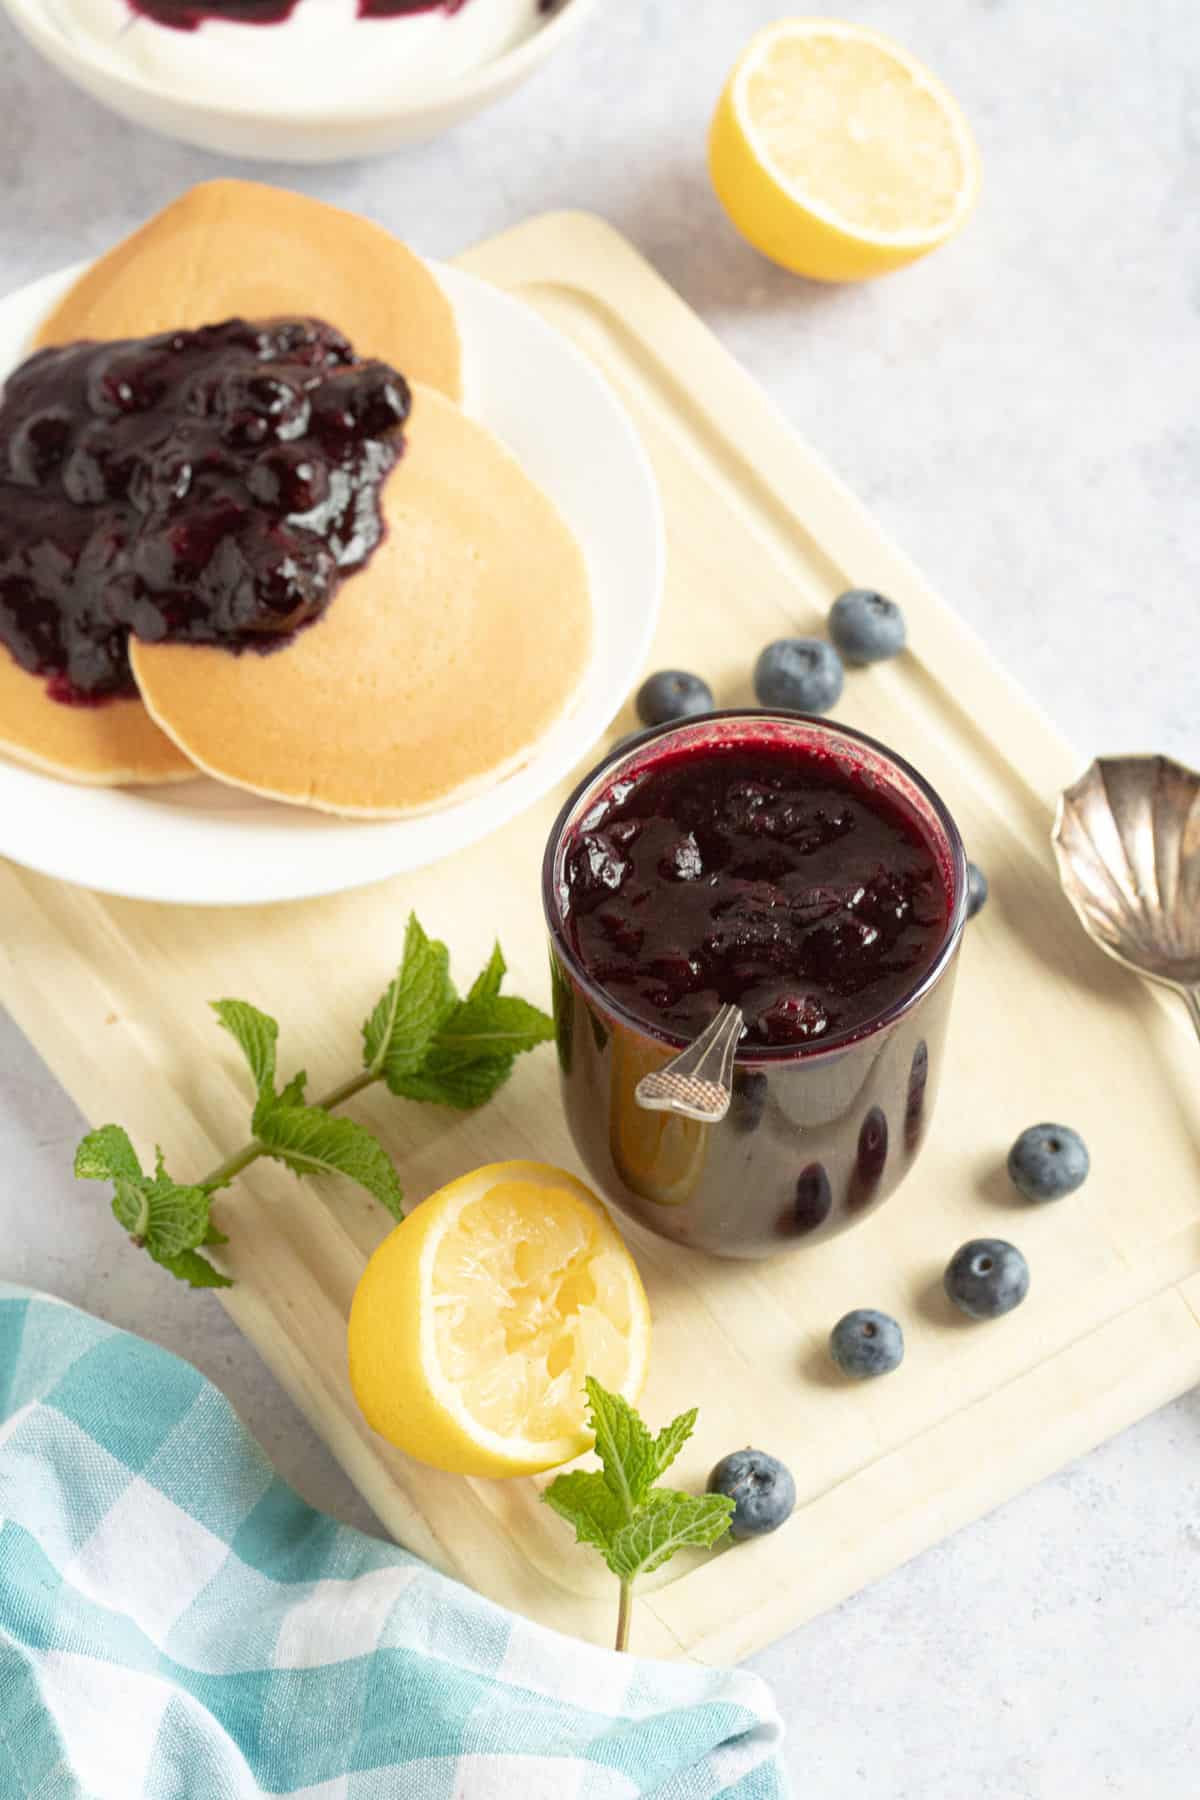 Blueberry compote in jar and spooned onto pancakes.